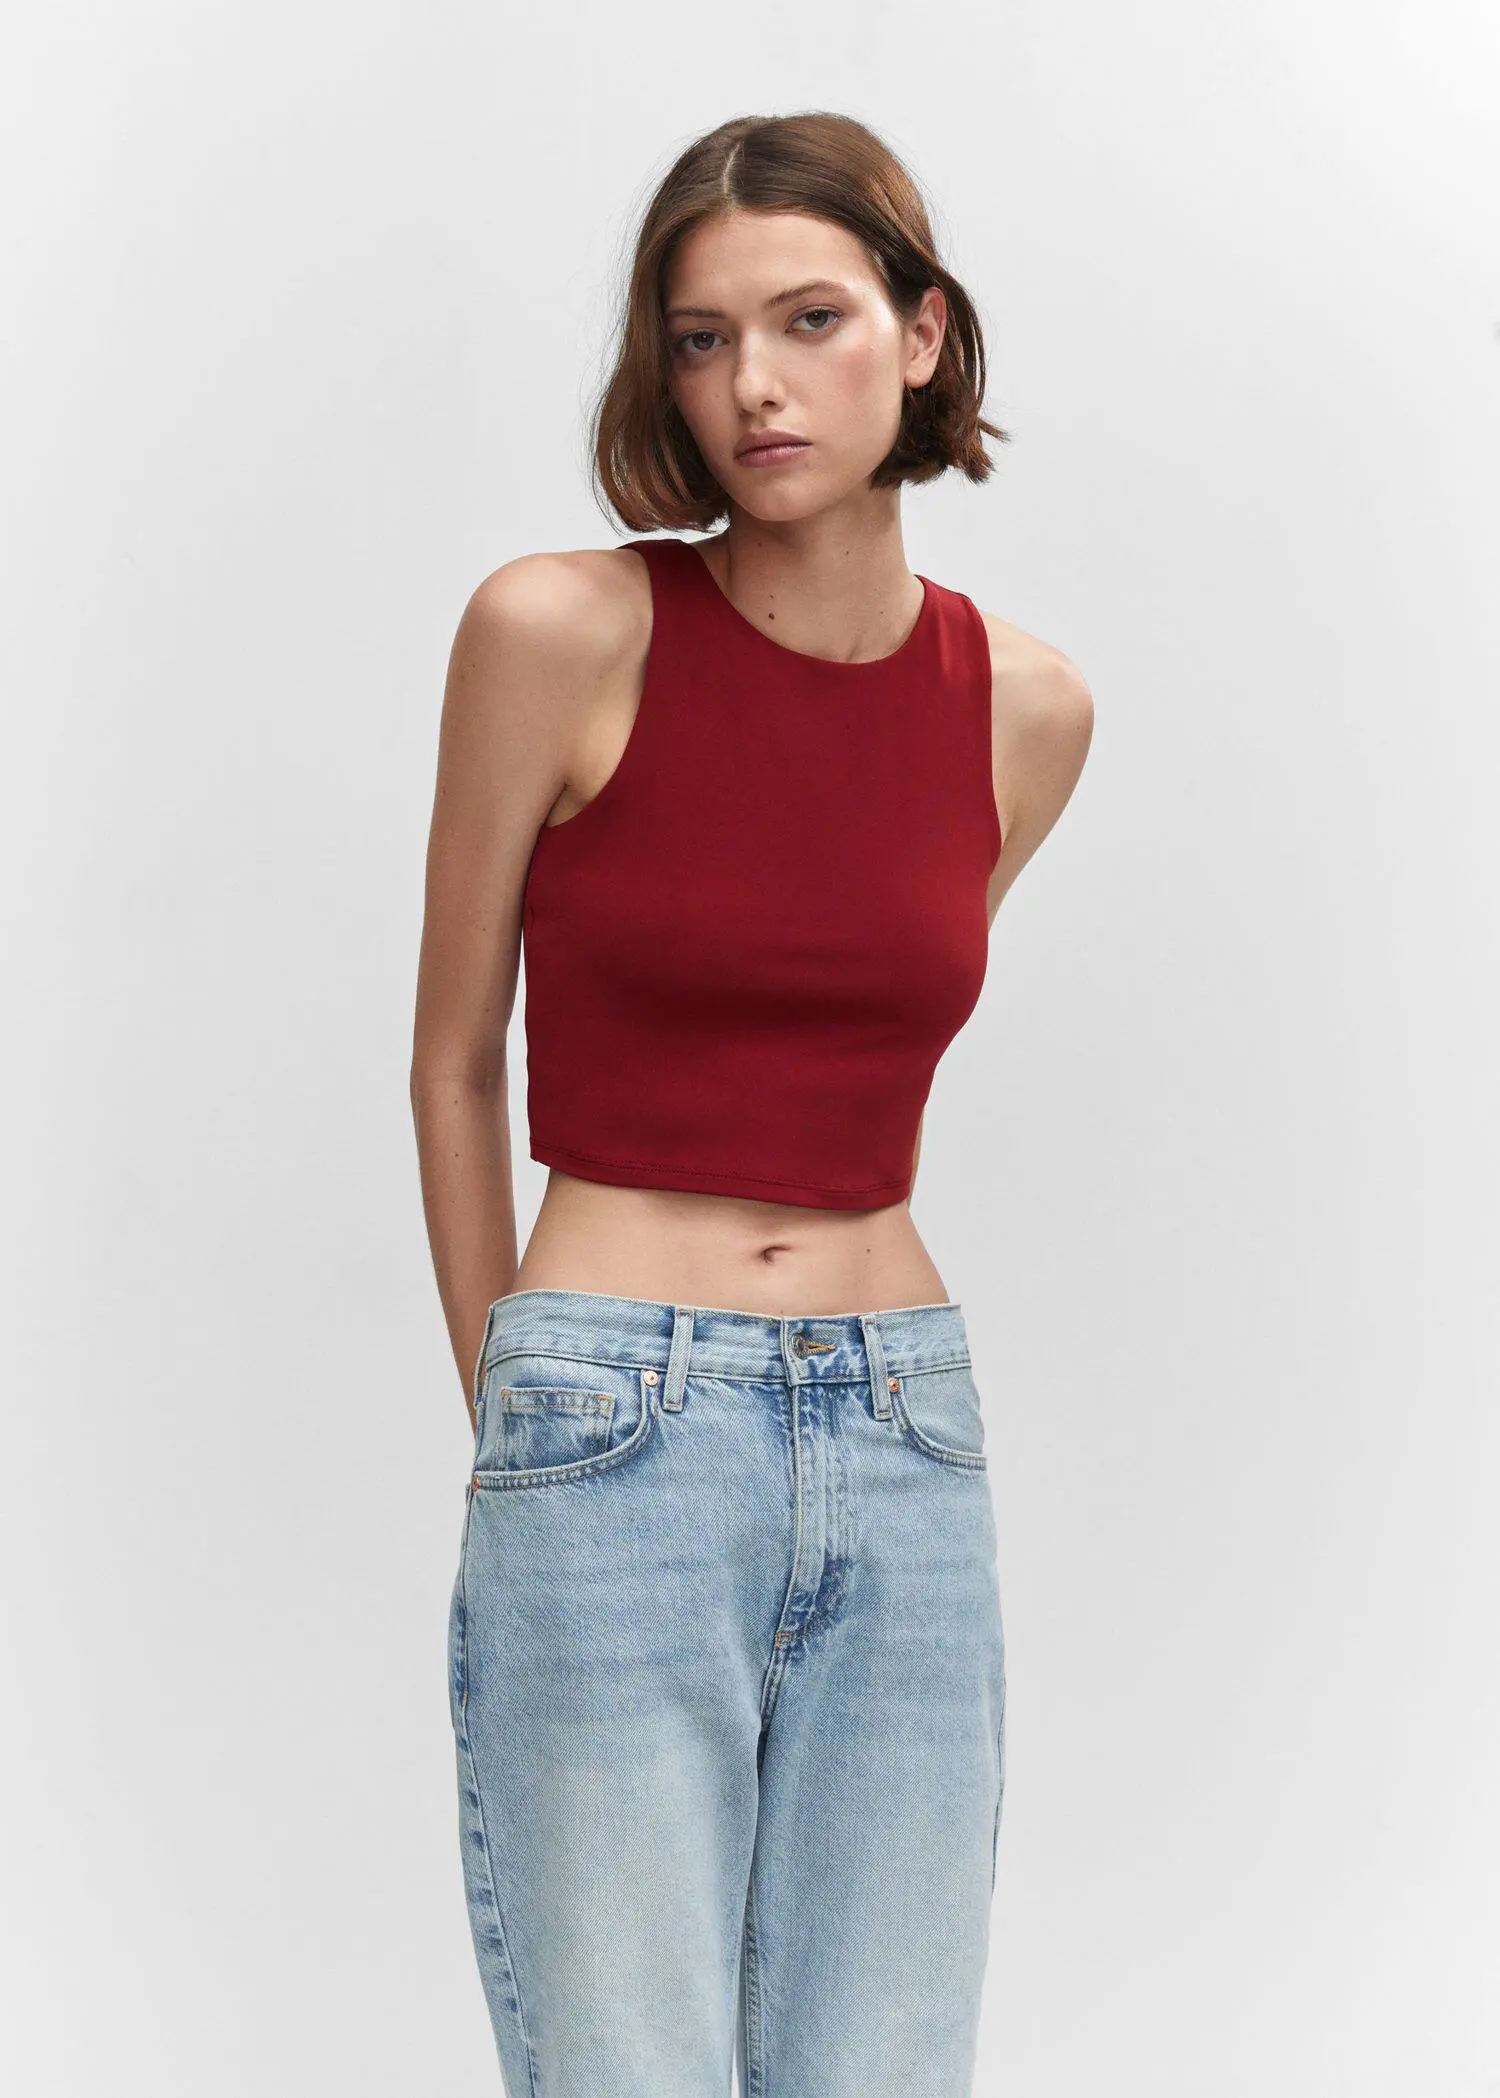 Mango Crop top with halter neck. a woman wearing a red top and jeans. 